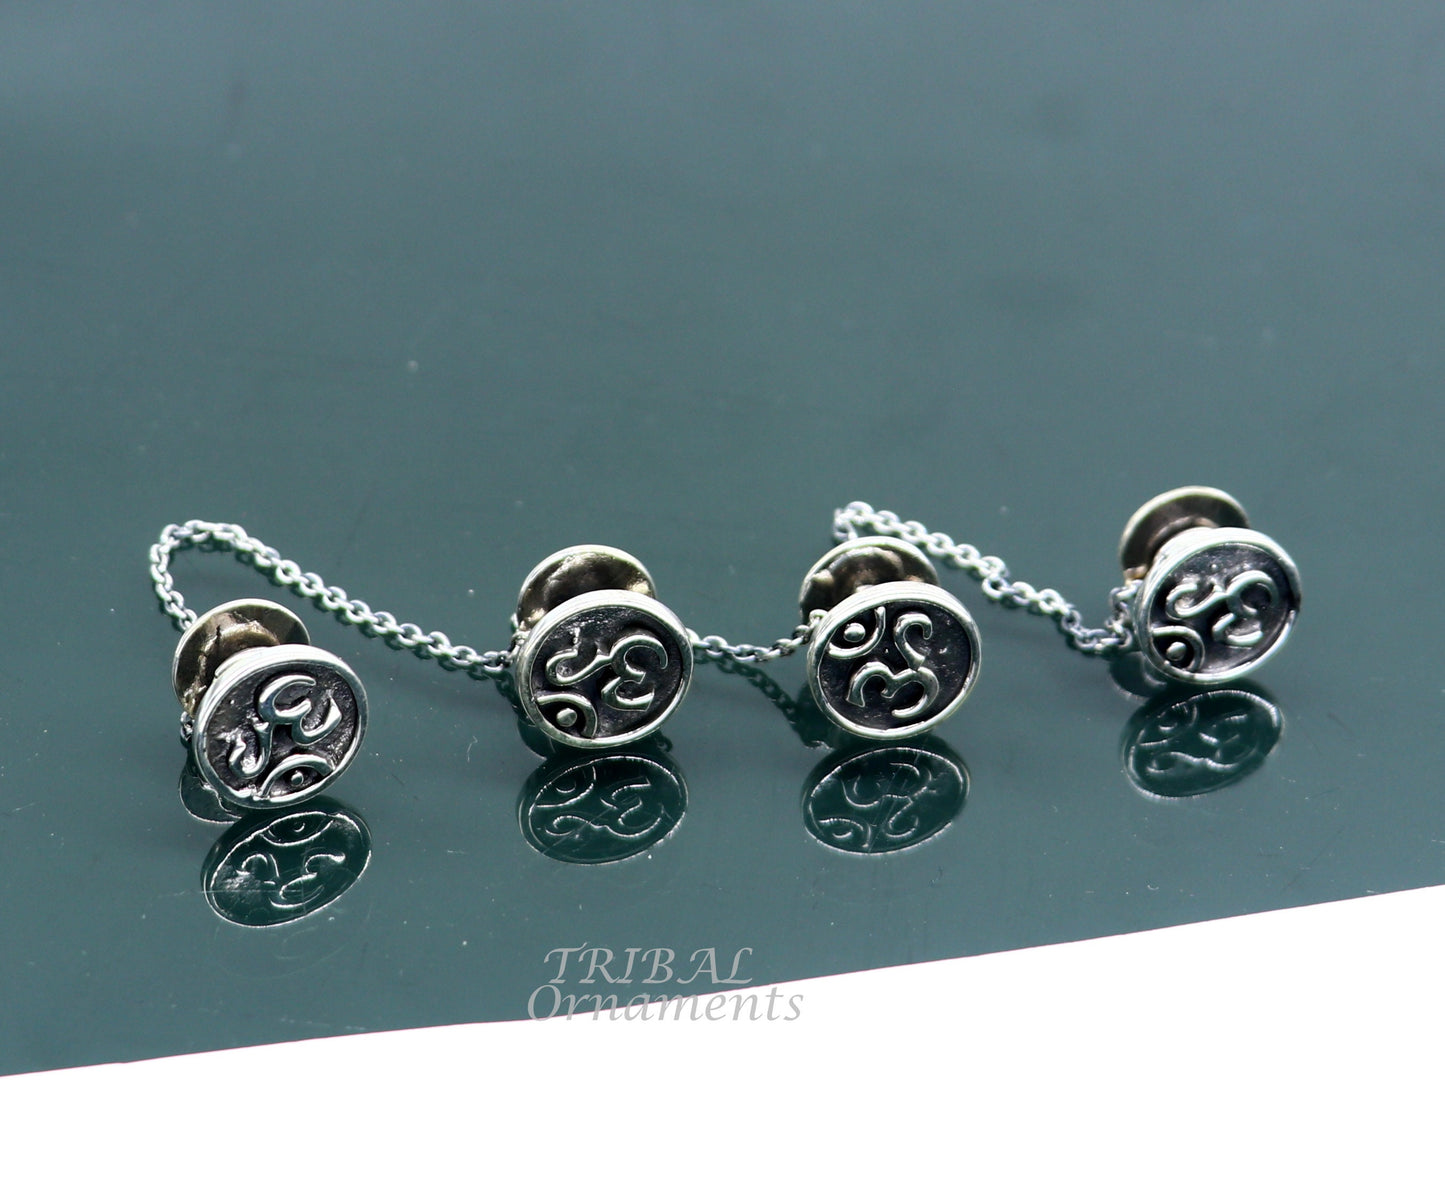 925 Sterling silver handmade gorgeous sign Aum or OM design buttons or cufflinks  for men's kurta, best gifting jewelry occasions btn02 - TRIBAL ORNAMENTS